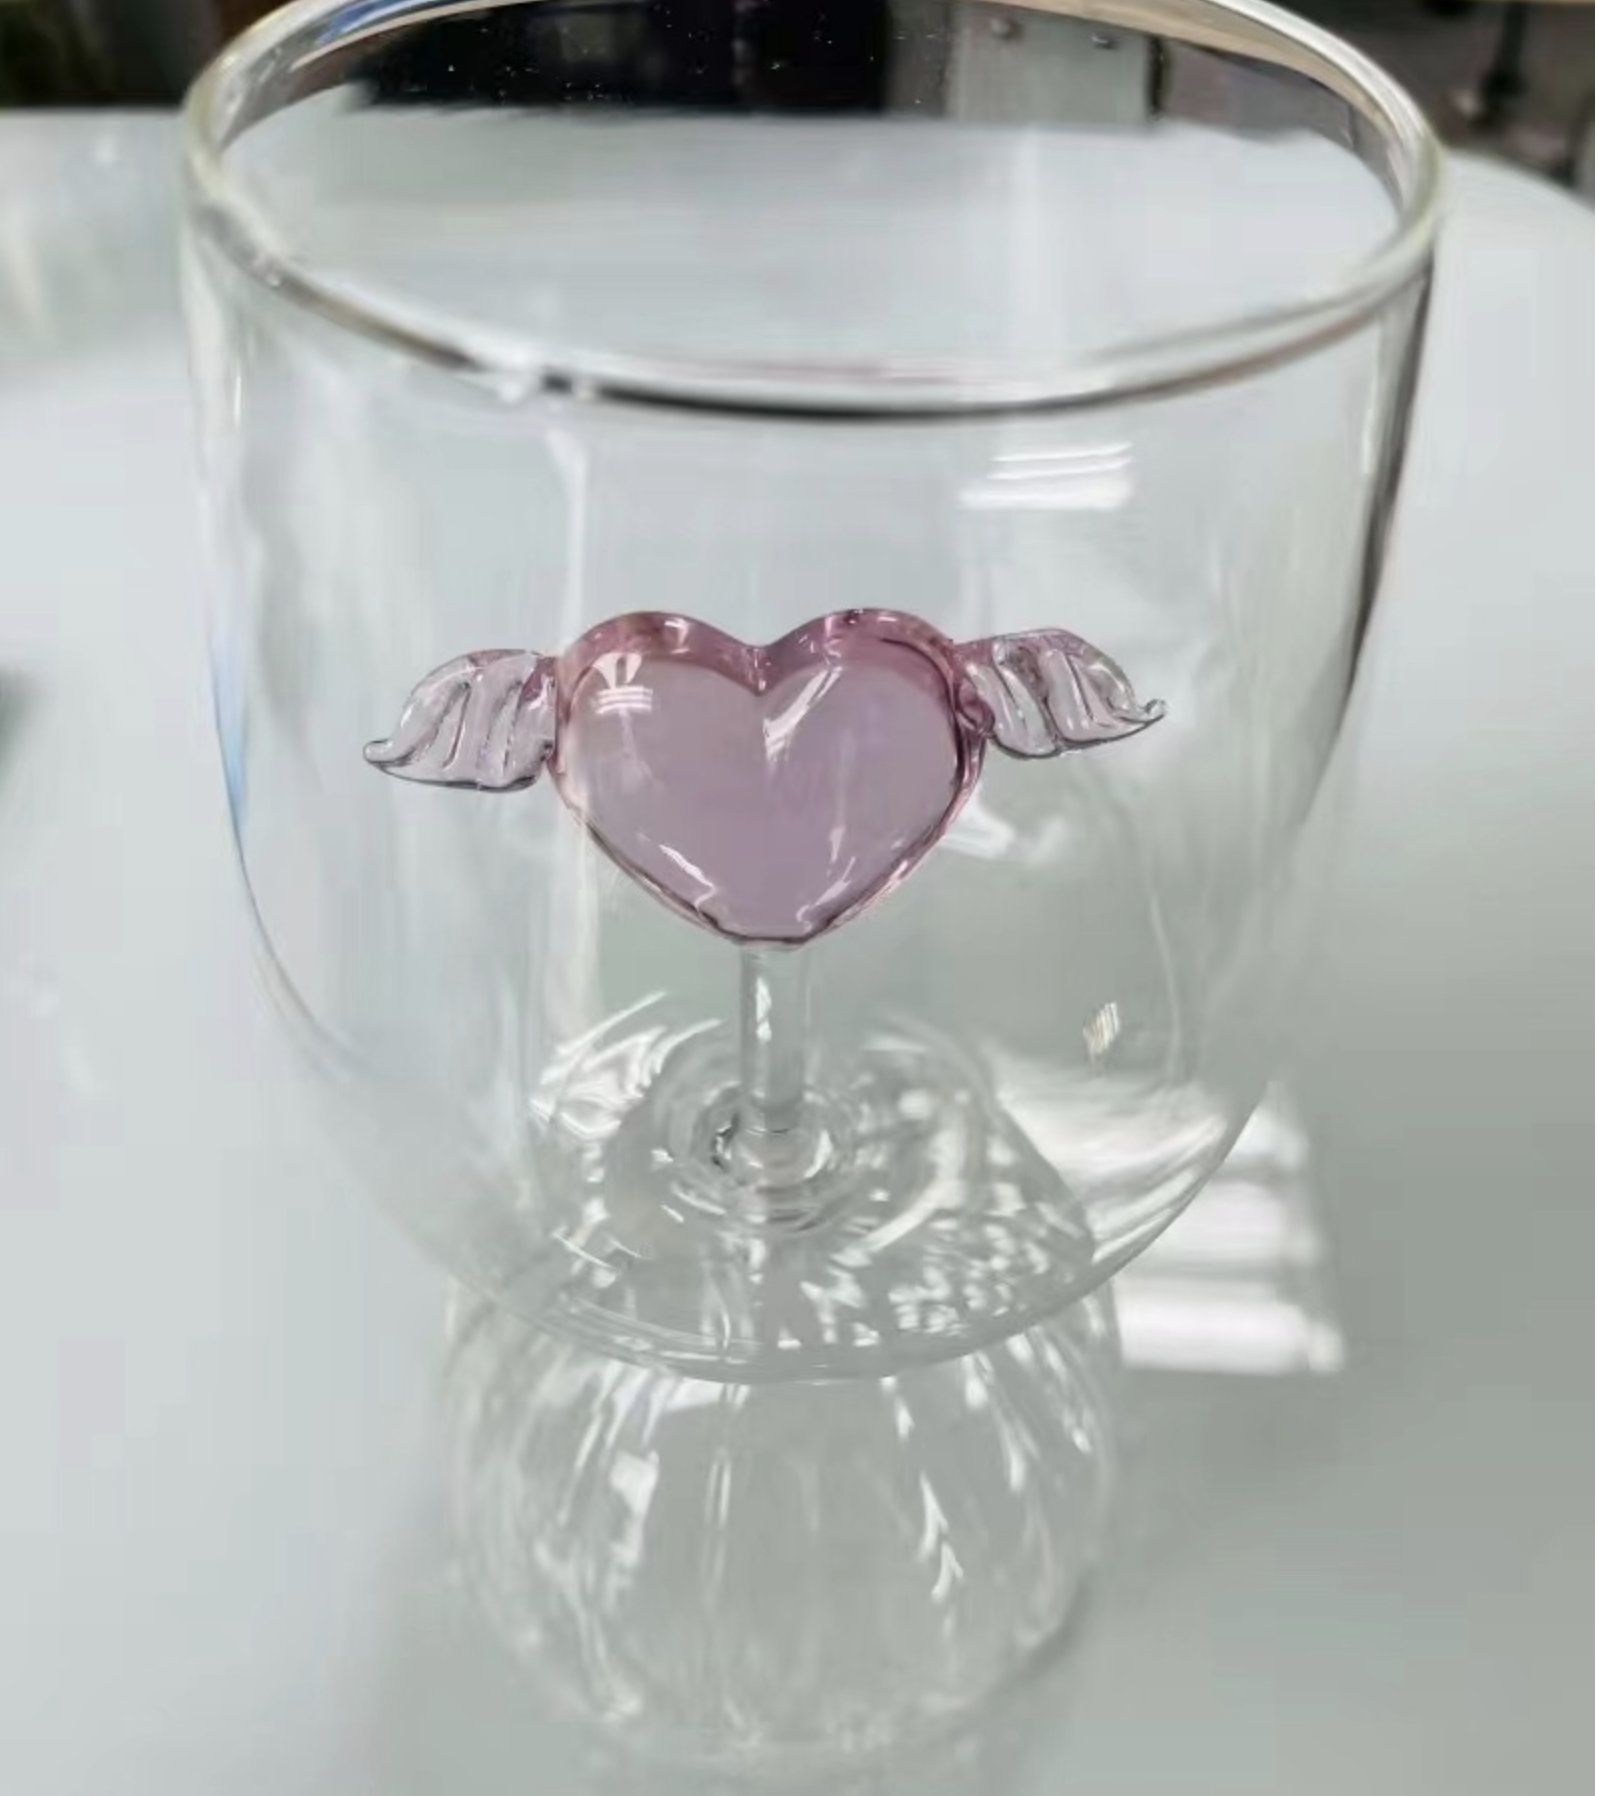 3D Glass Art Cups Handmade Pink Heart, Rose Glass in Glass Cups Unique  Romantic Glasses for Wine, Cocktail, Multi-use. Japanese Cute 